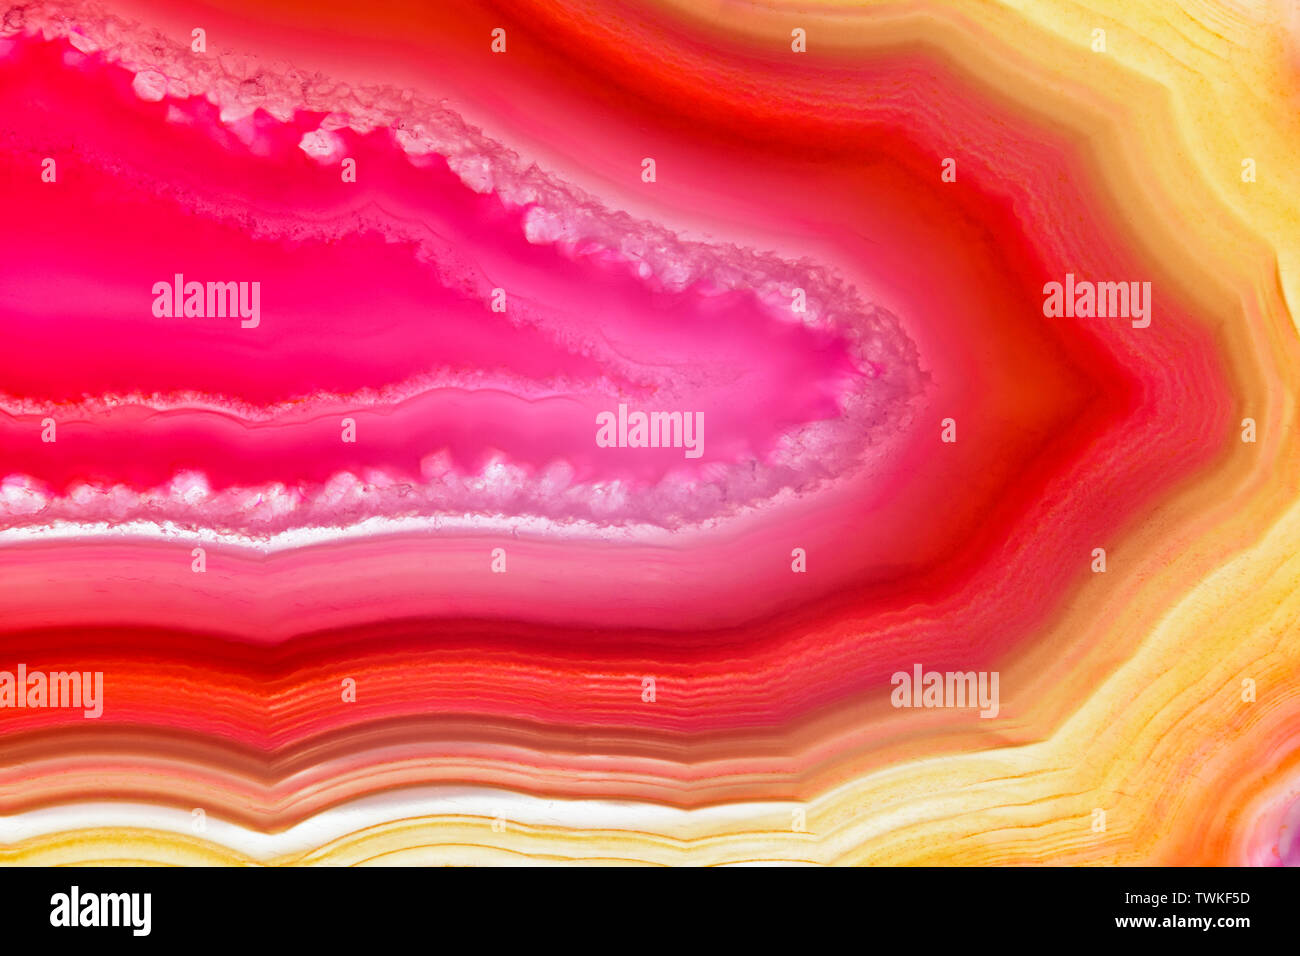 Red orange agate slice striped mineral abstract background Stock Photo